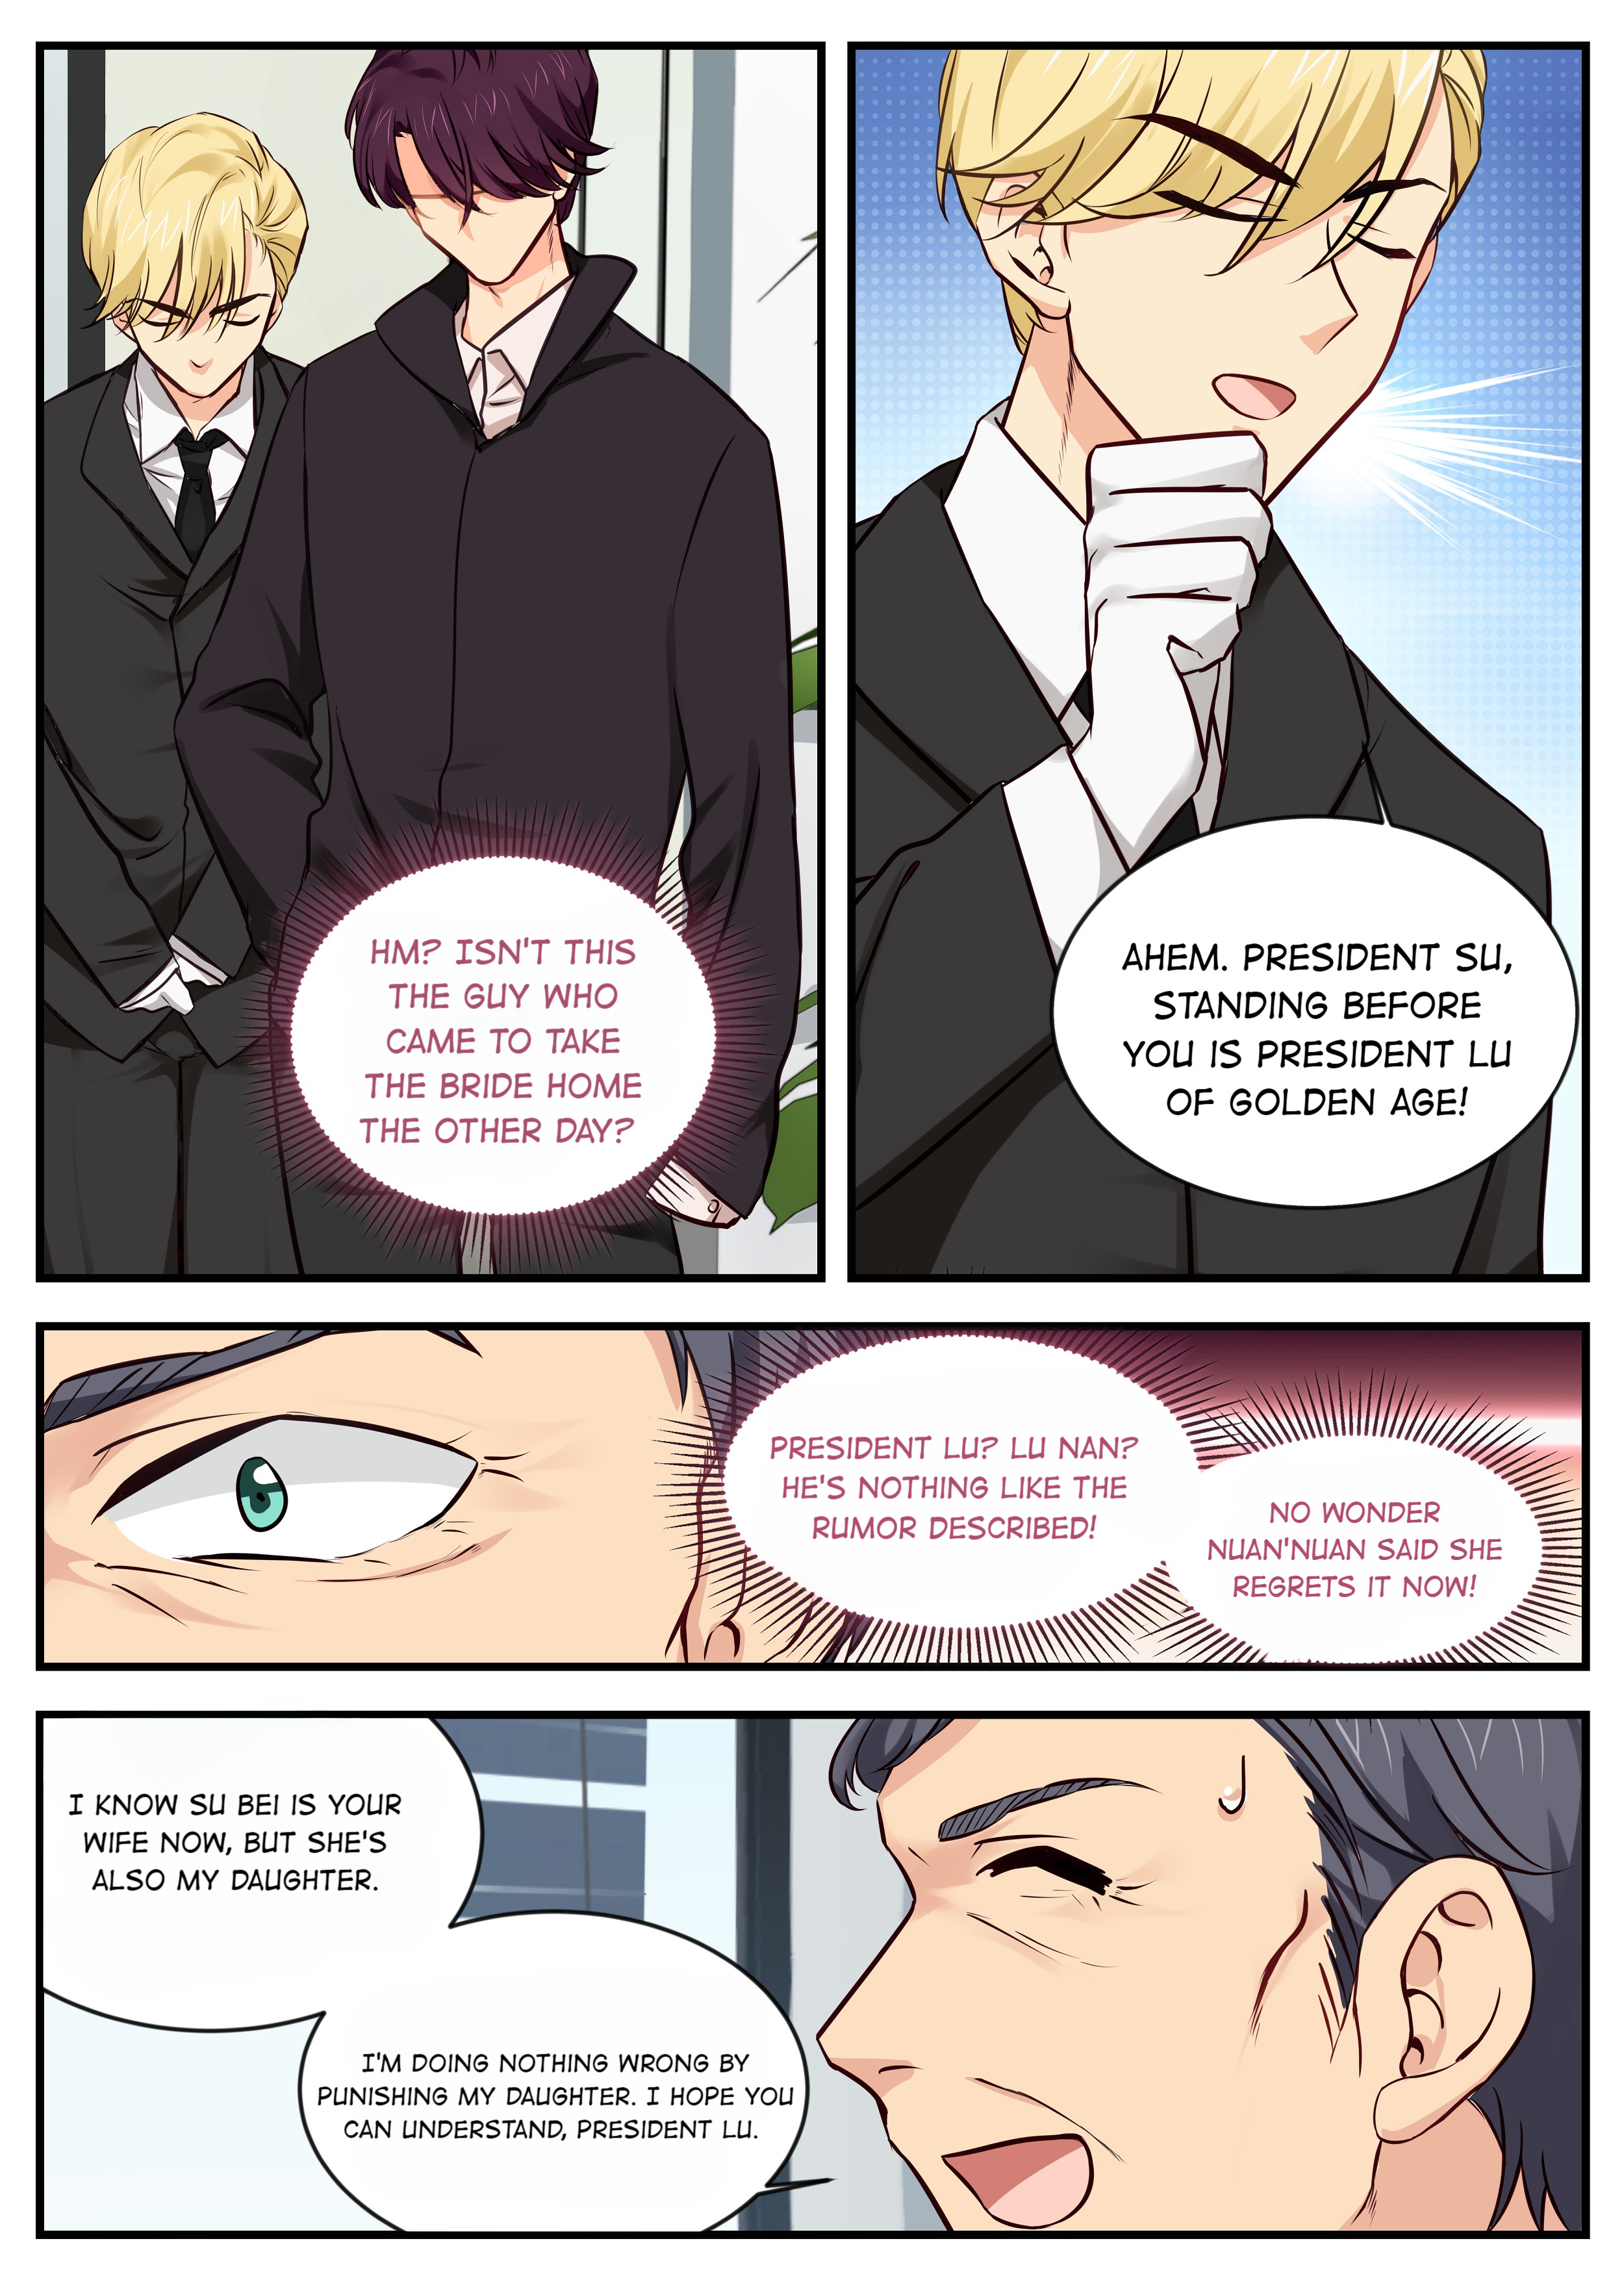 Married A Celebrity Manager - Page 2